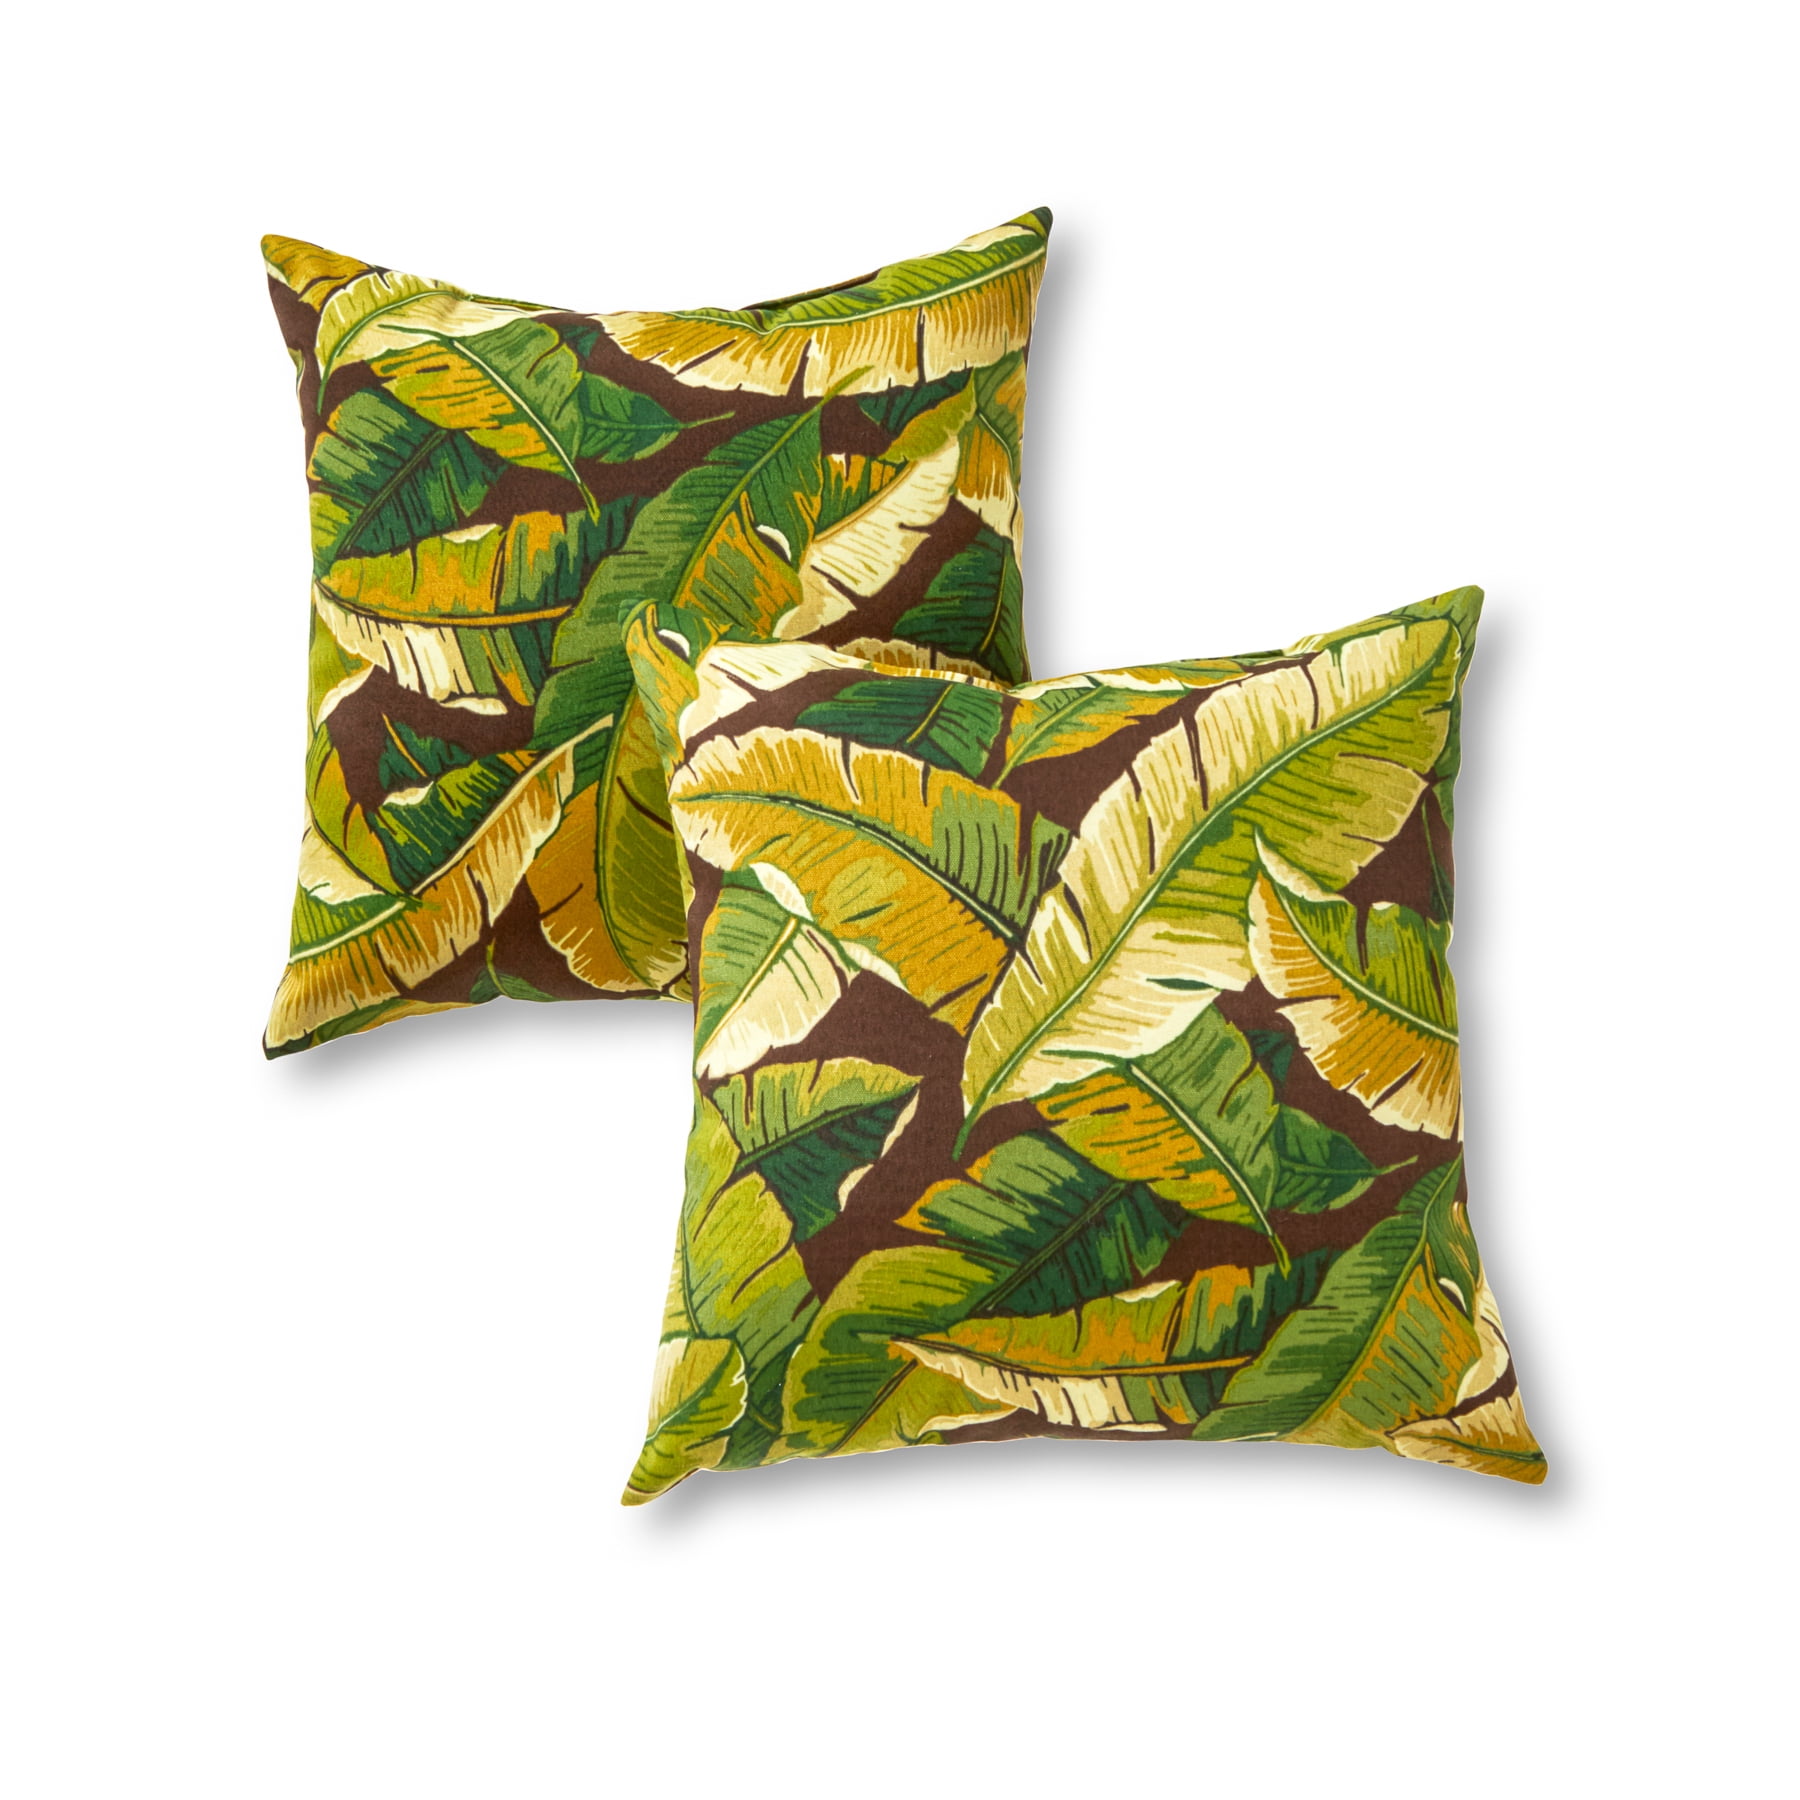 Set of 4 Outdoor Black Tropical Palm Leaf Square & Lumbar Pillows Choose Size 